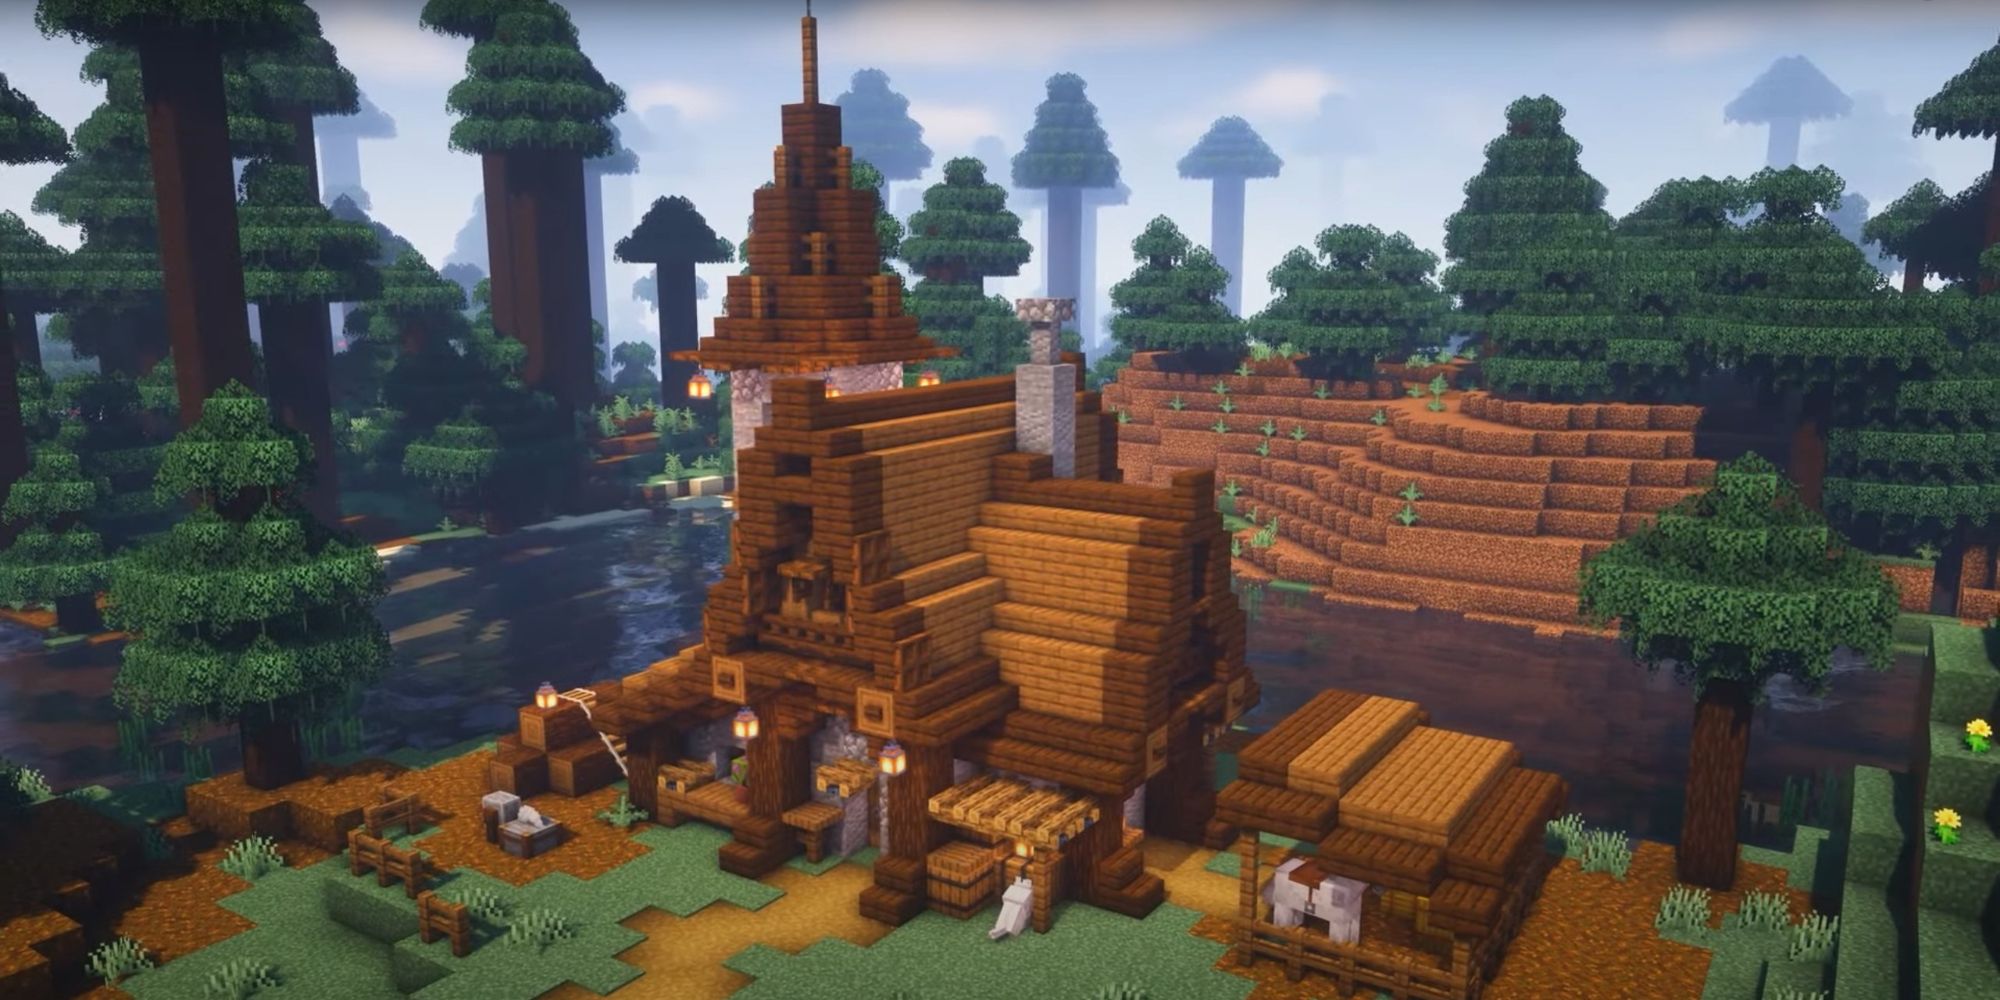 An image from Minecraft of a Medieval Survival House, created with dark oak and spruce planks. This house features a large tower and a small barn for a horse.